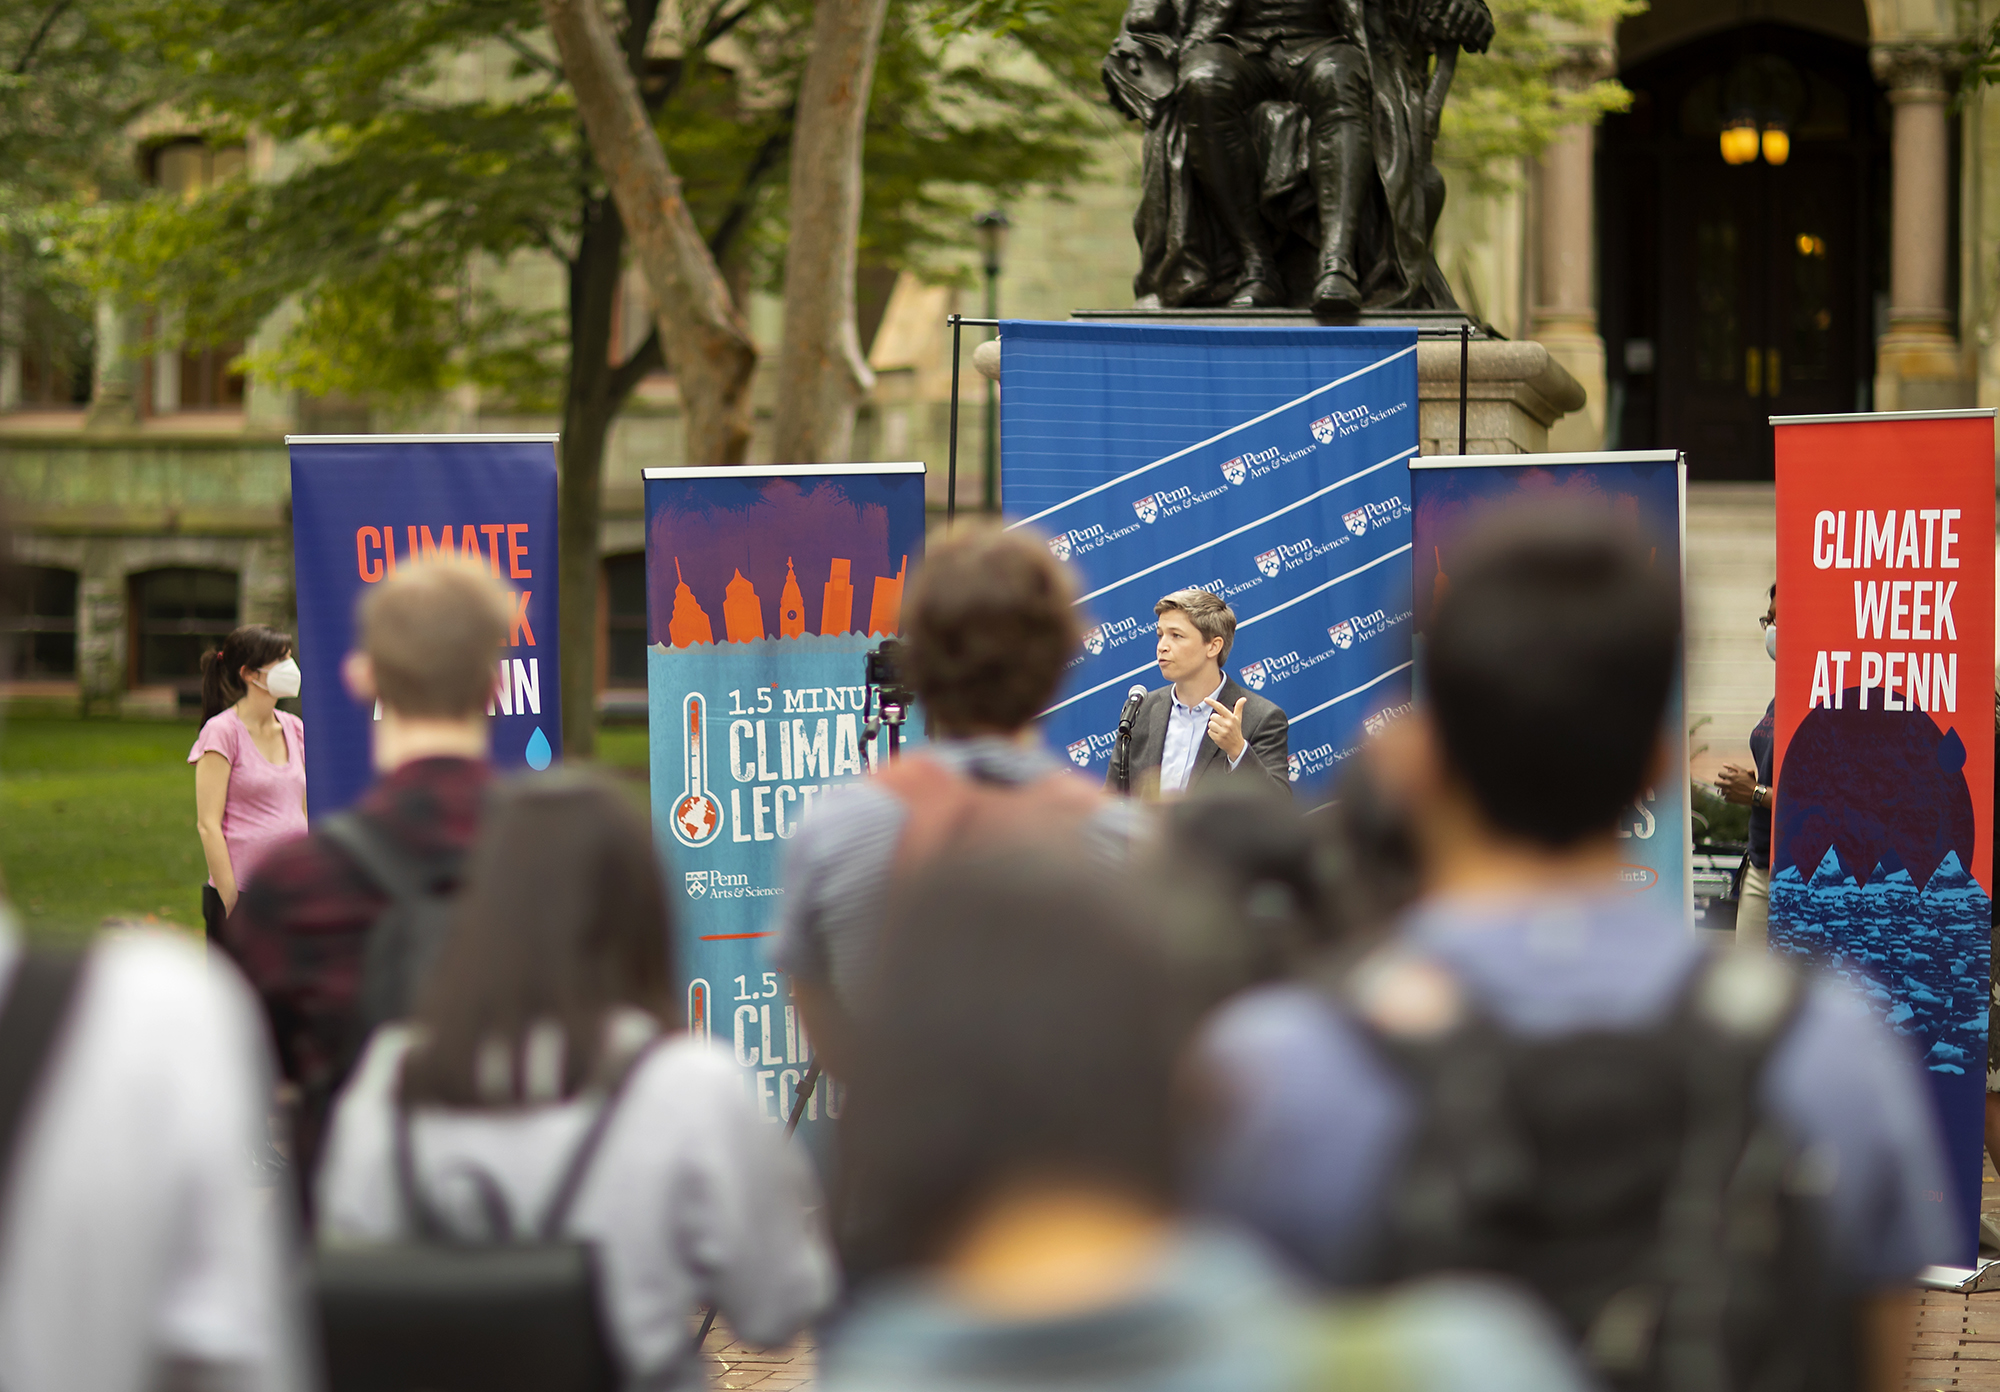 A person speaking at a lectern outside to a crowd with banners reading Climate Week at Penn